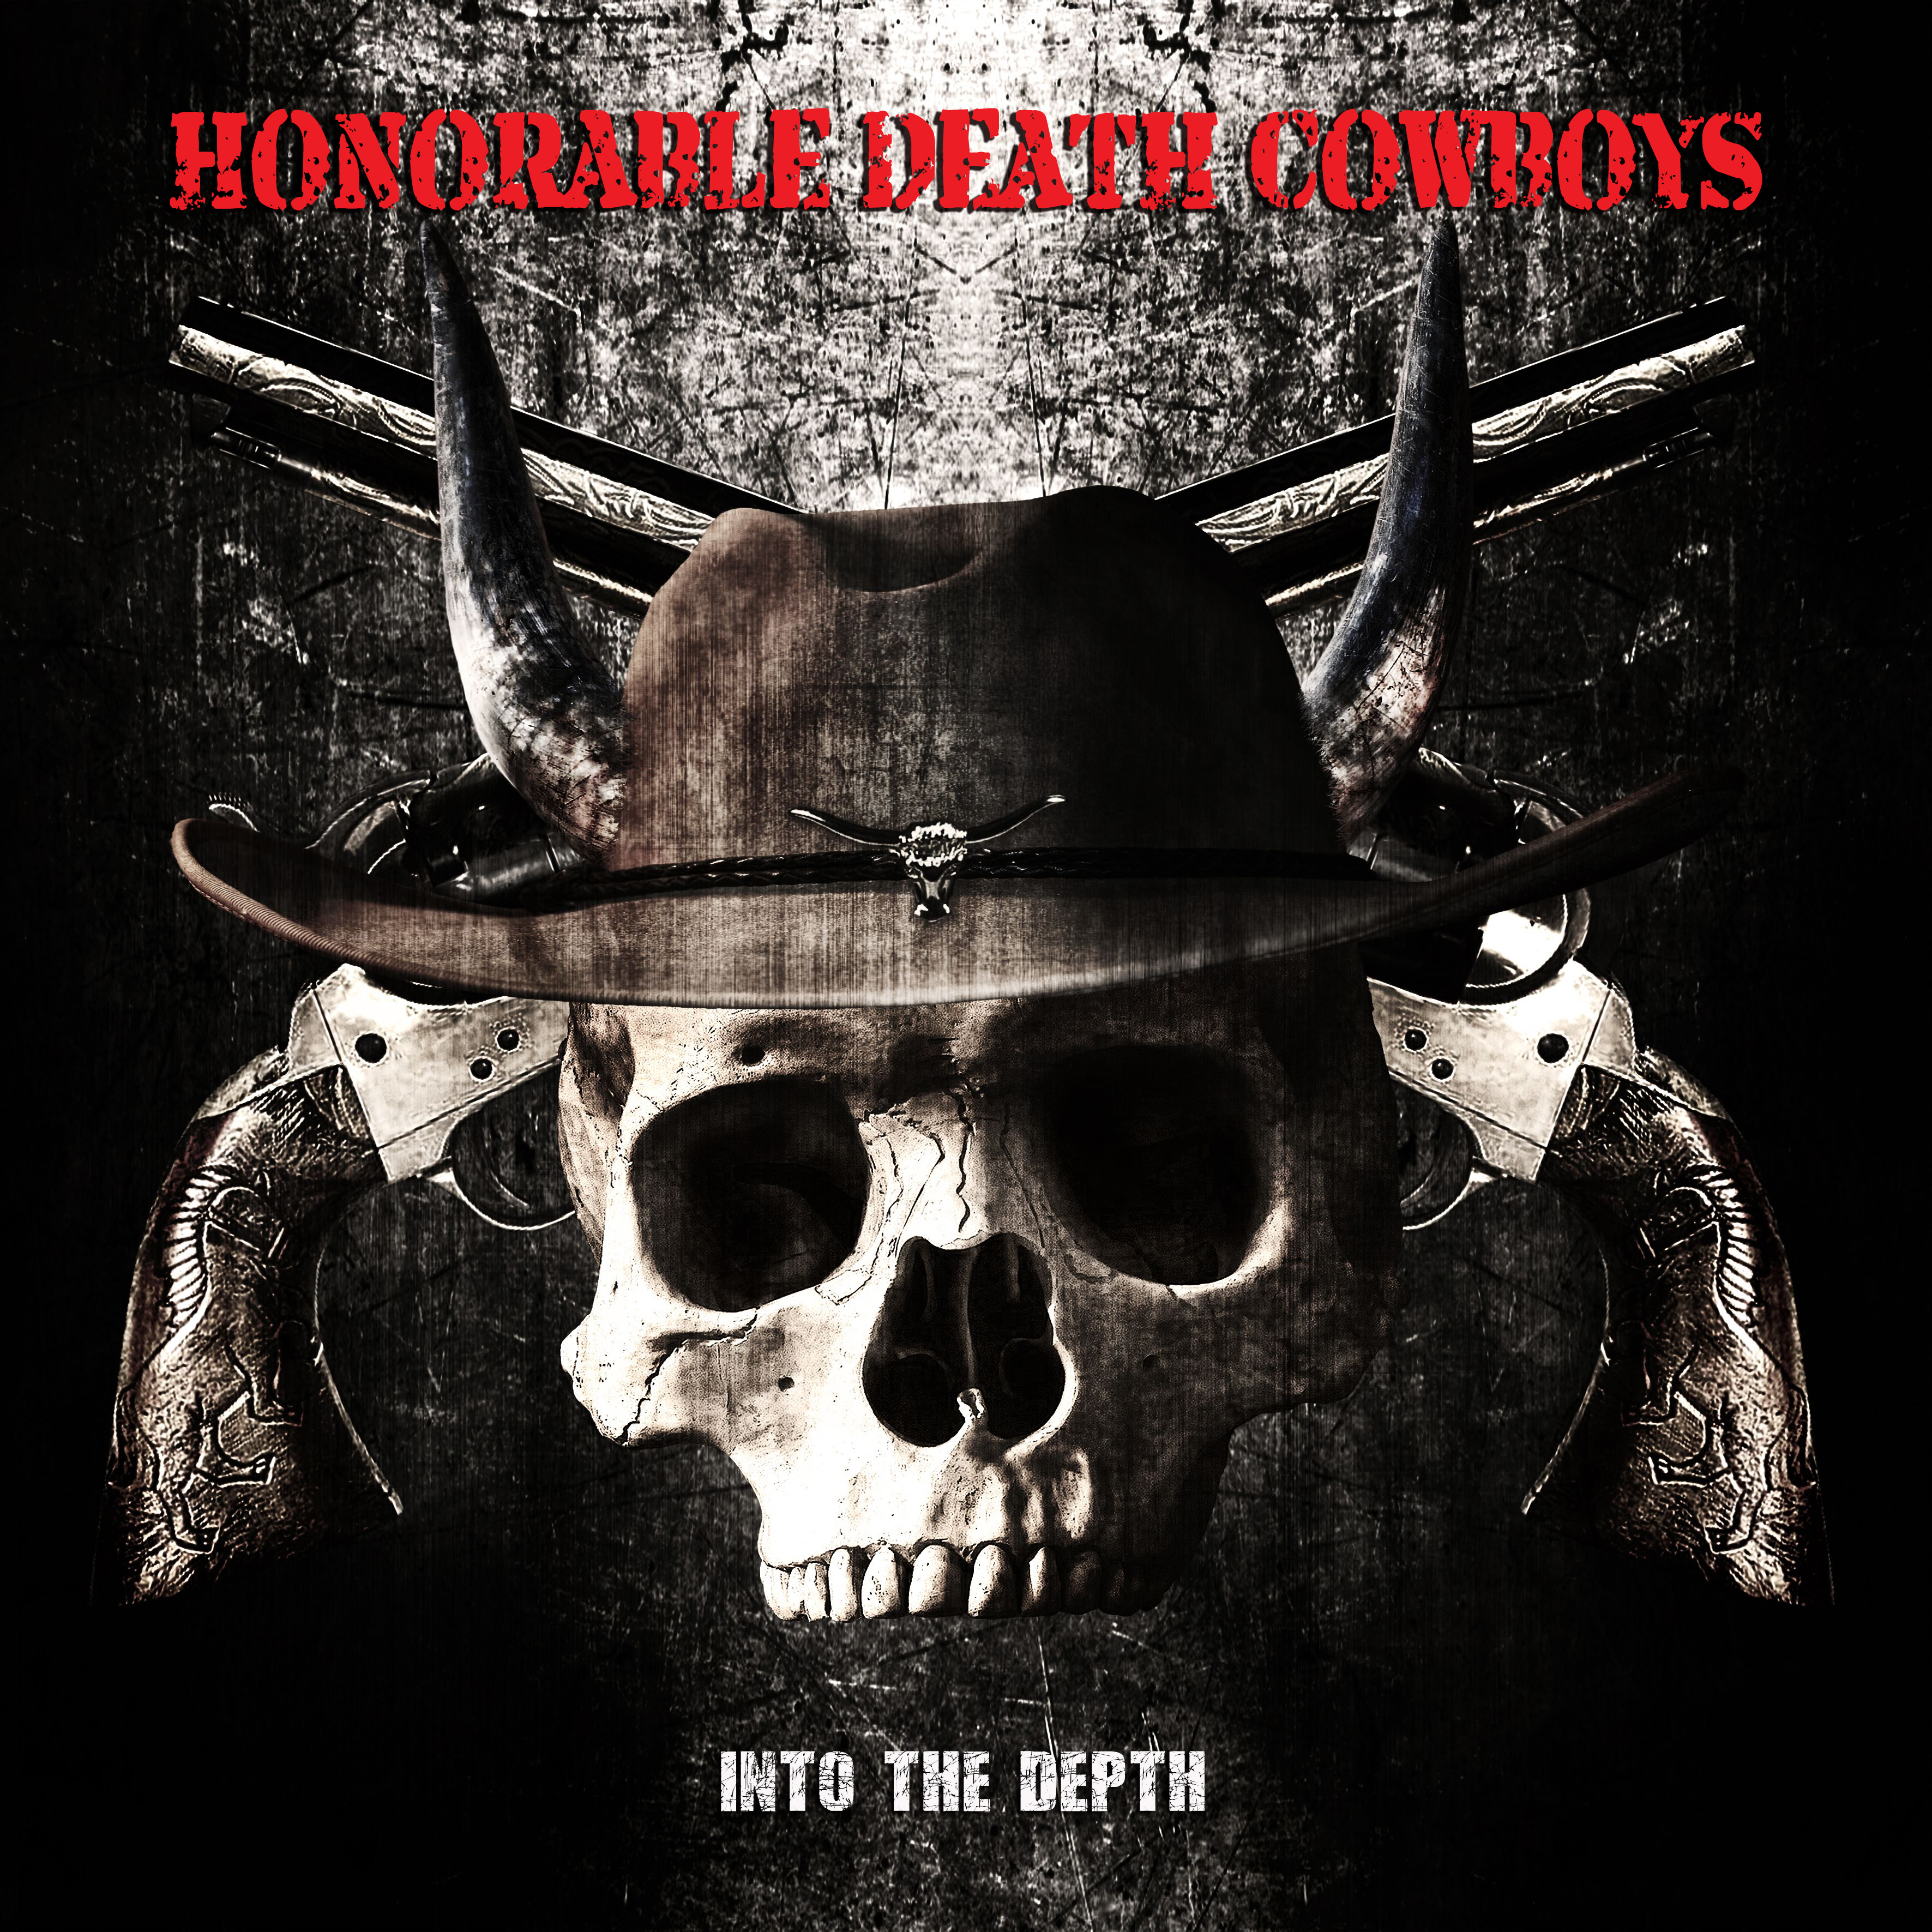 HONORABLE DEATH COWBOYS - Into the depth (single)